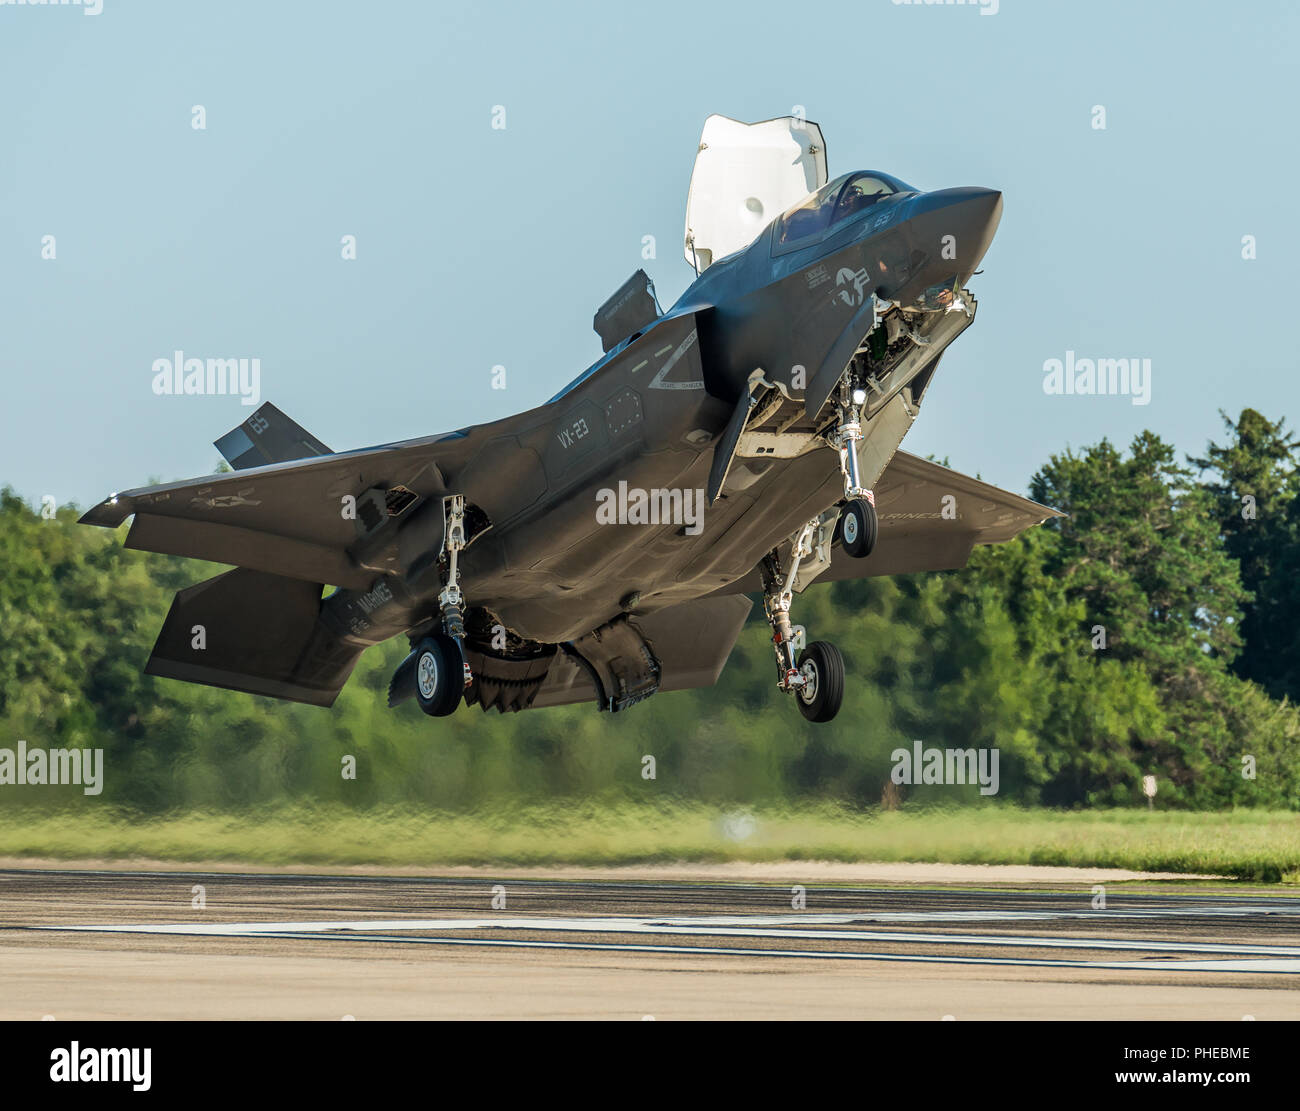 Royal Navy Cmdr. Nathan Gray, F-35 Pax River ITF test pilot, conducts short take offs and vertical landings with an F-35B on Aug. 23, 2018, at NAS Patuxent River as part of the workups for the First of Class Flight Trials aboard the HMS Queen Elizabeth.  Around 200 supporting staff from the ITF, including pilots, engineers, maintainers and data analysts, will take two F-35Bs test aircraft aboard HMS Queen Elizabeth this fall to evaluate the fifth-generation aircraft performance and integration with Royal Navy’s newest aircraft carrier. This fixed wing test period brings the U.K. one step close Stock Photo